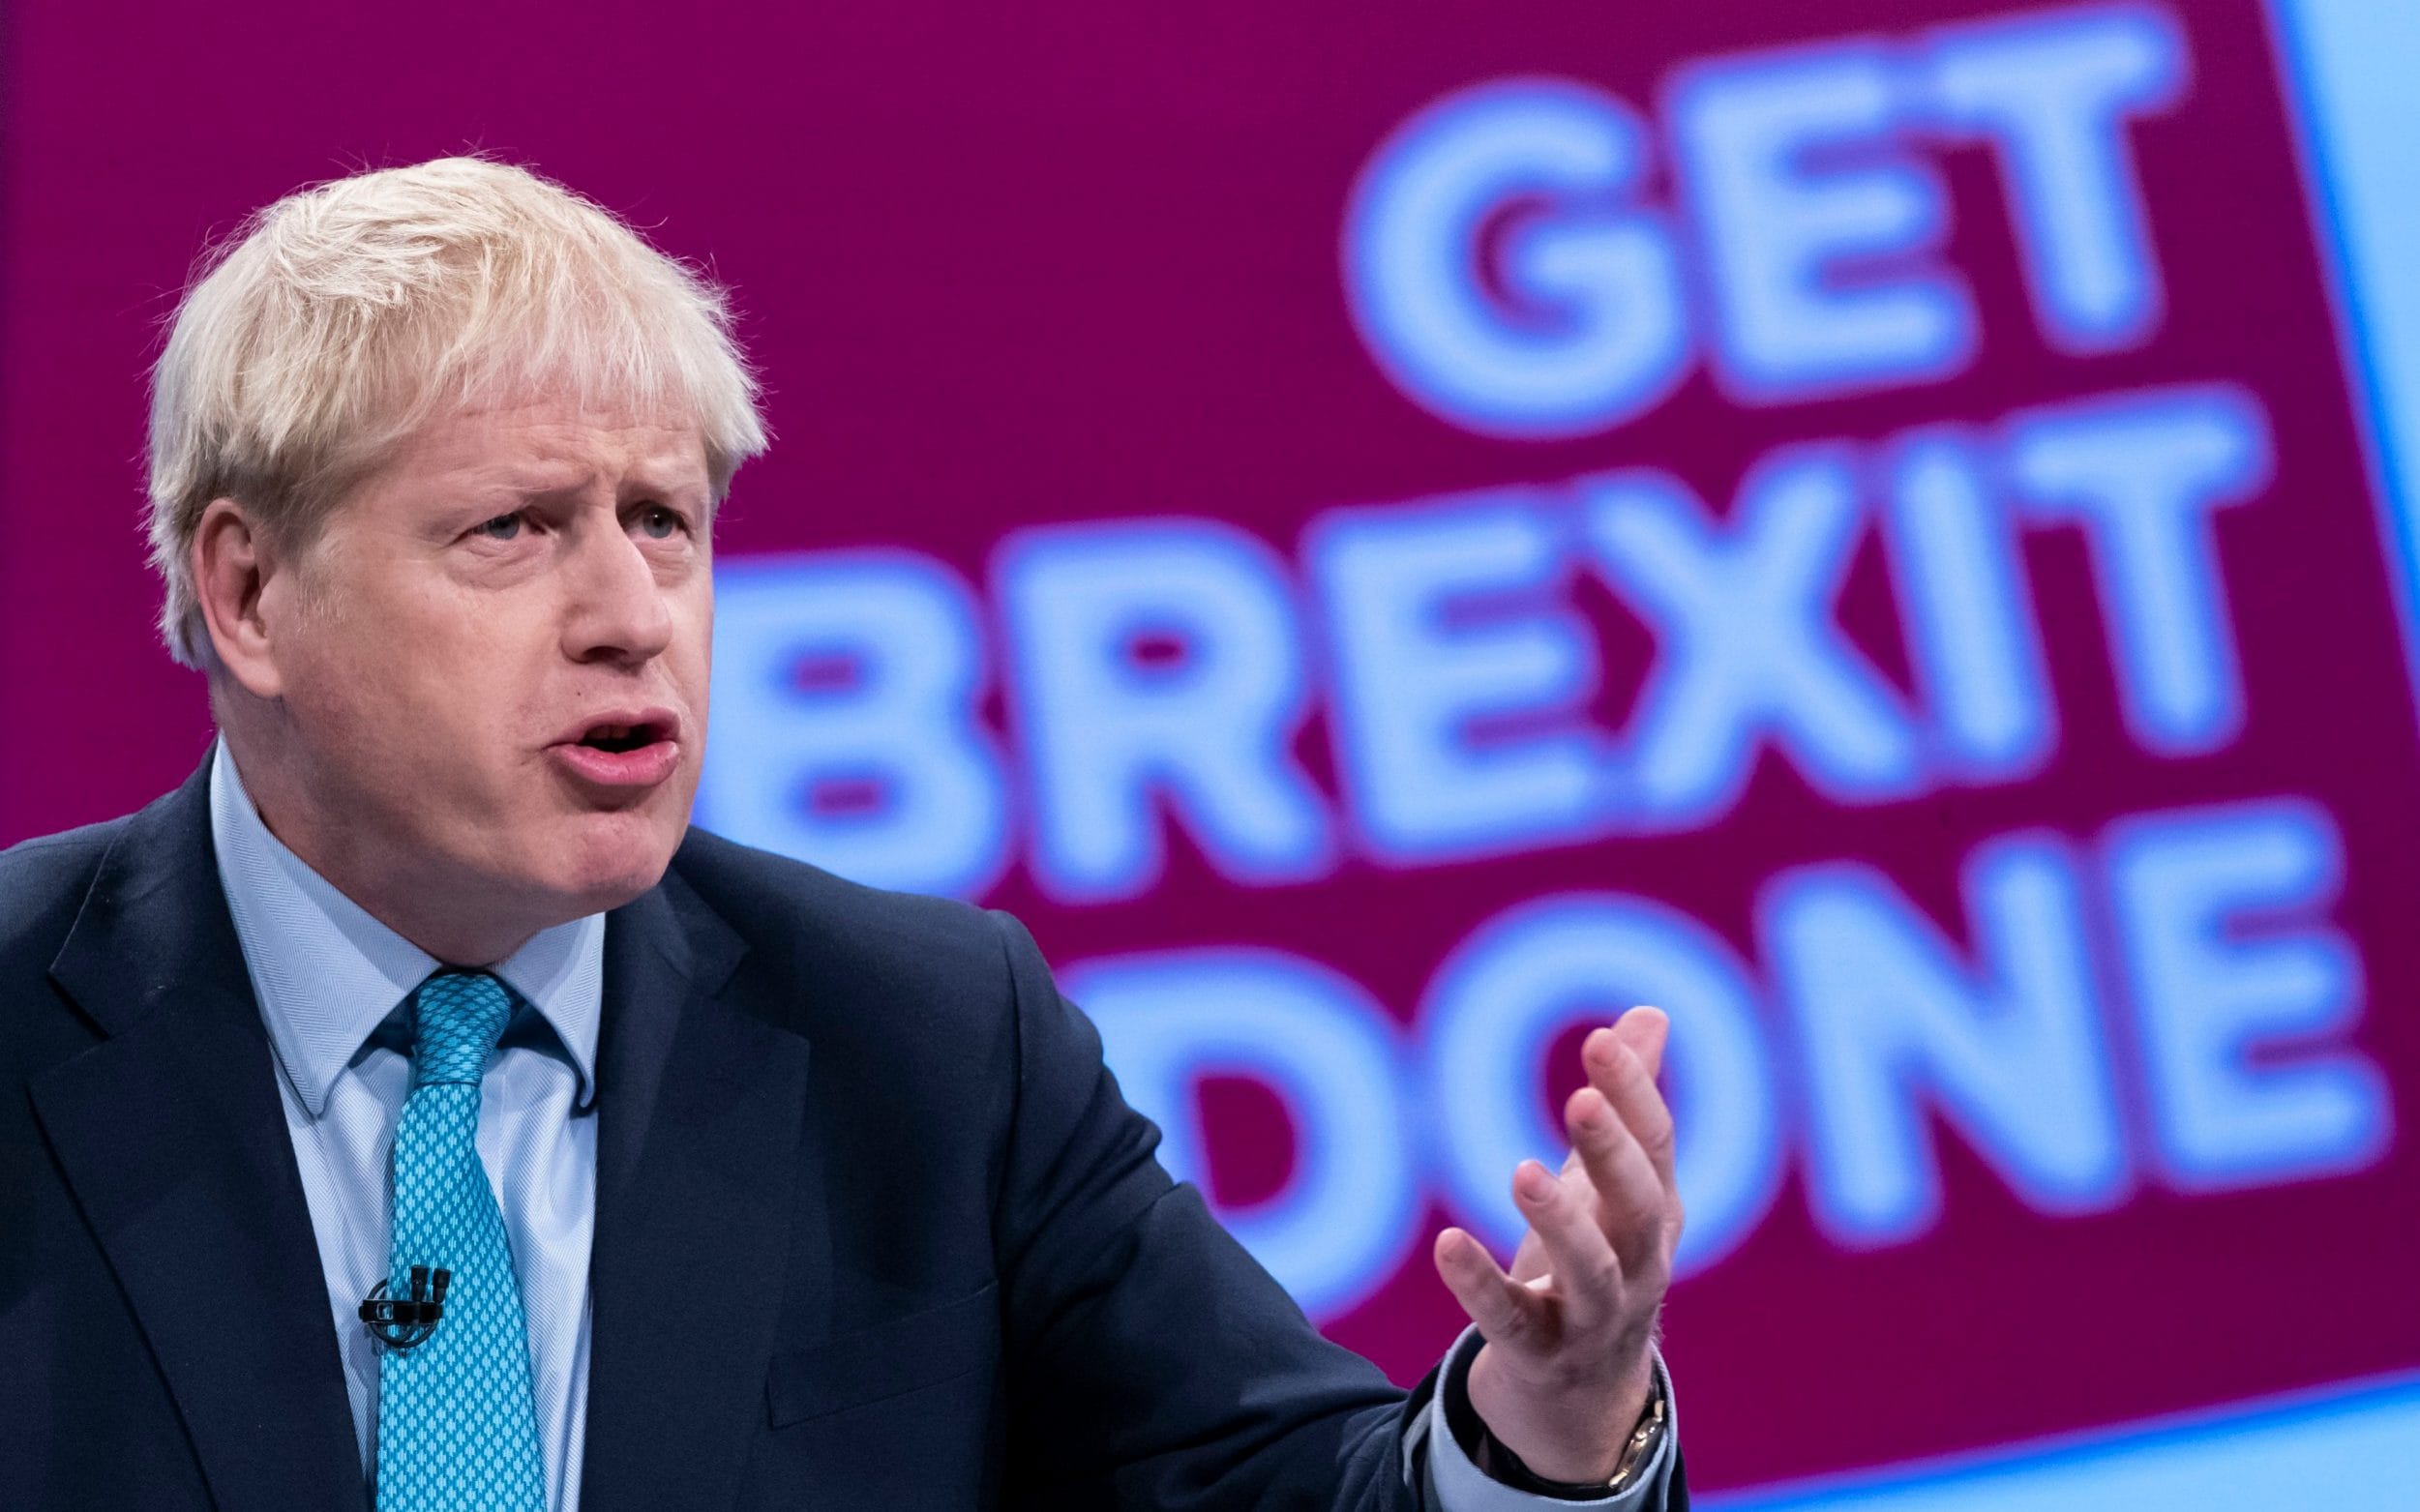 Brexit latest - BORIS JOHNSON's plans to strip the Supreme Court of powers following the 2019 Brexit row over the prorogation of Parliament took a huge leap forward after clearing the Commons.